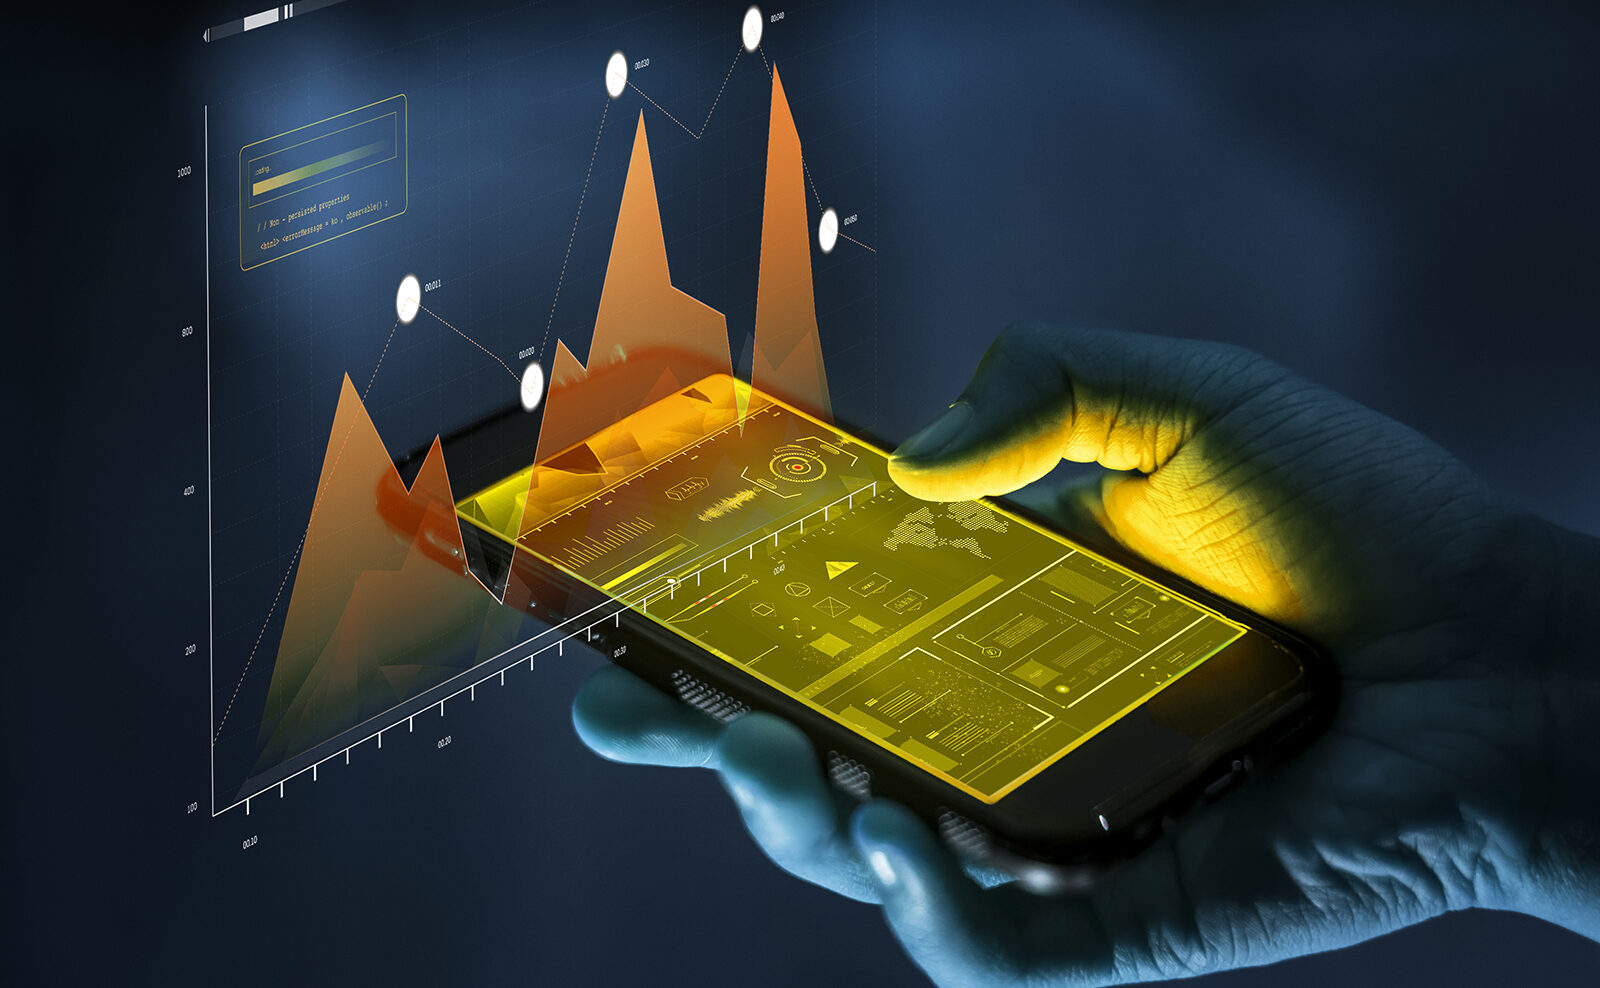 Smartphone analysis concept image - a person holding a smartphone with graphs overlaid